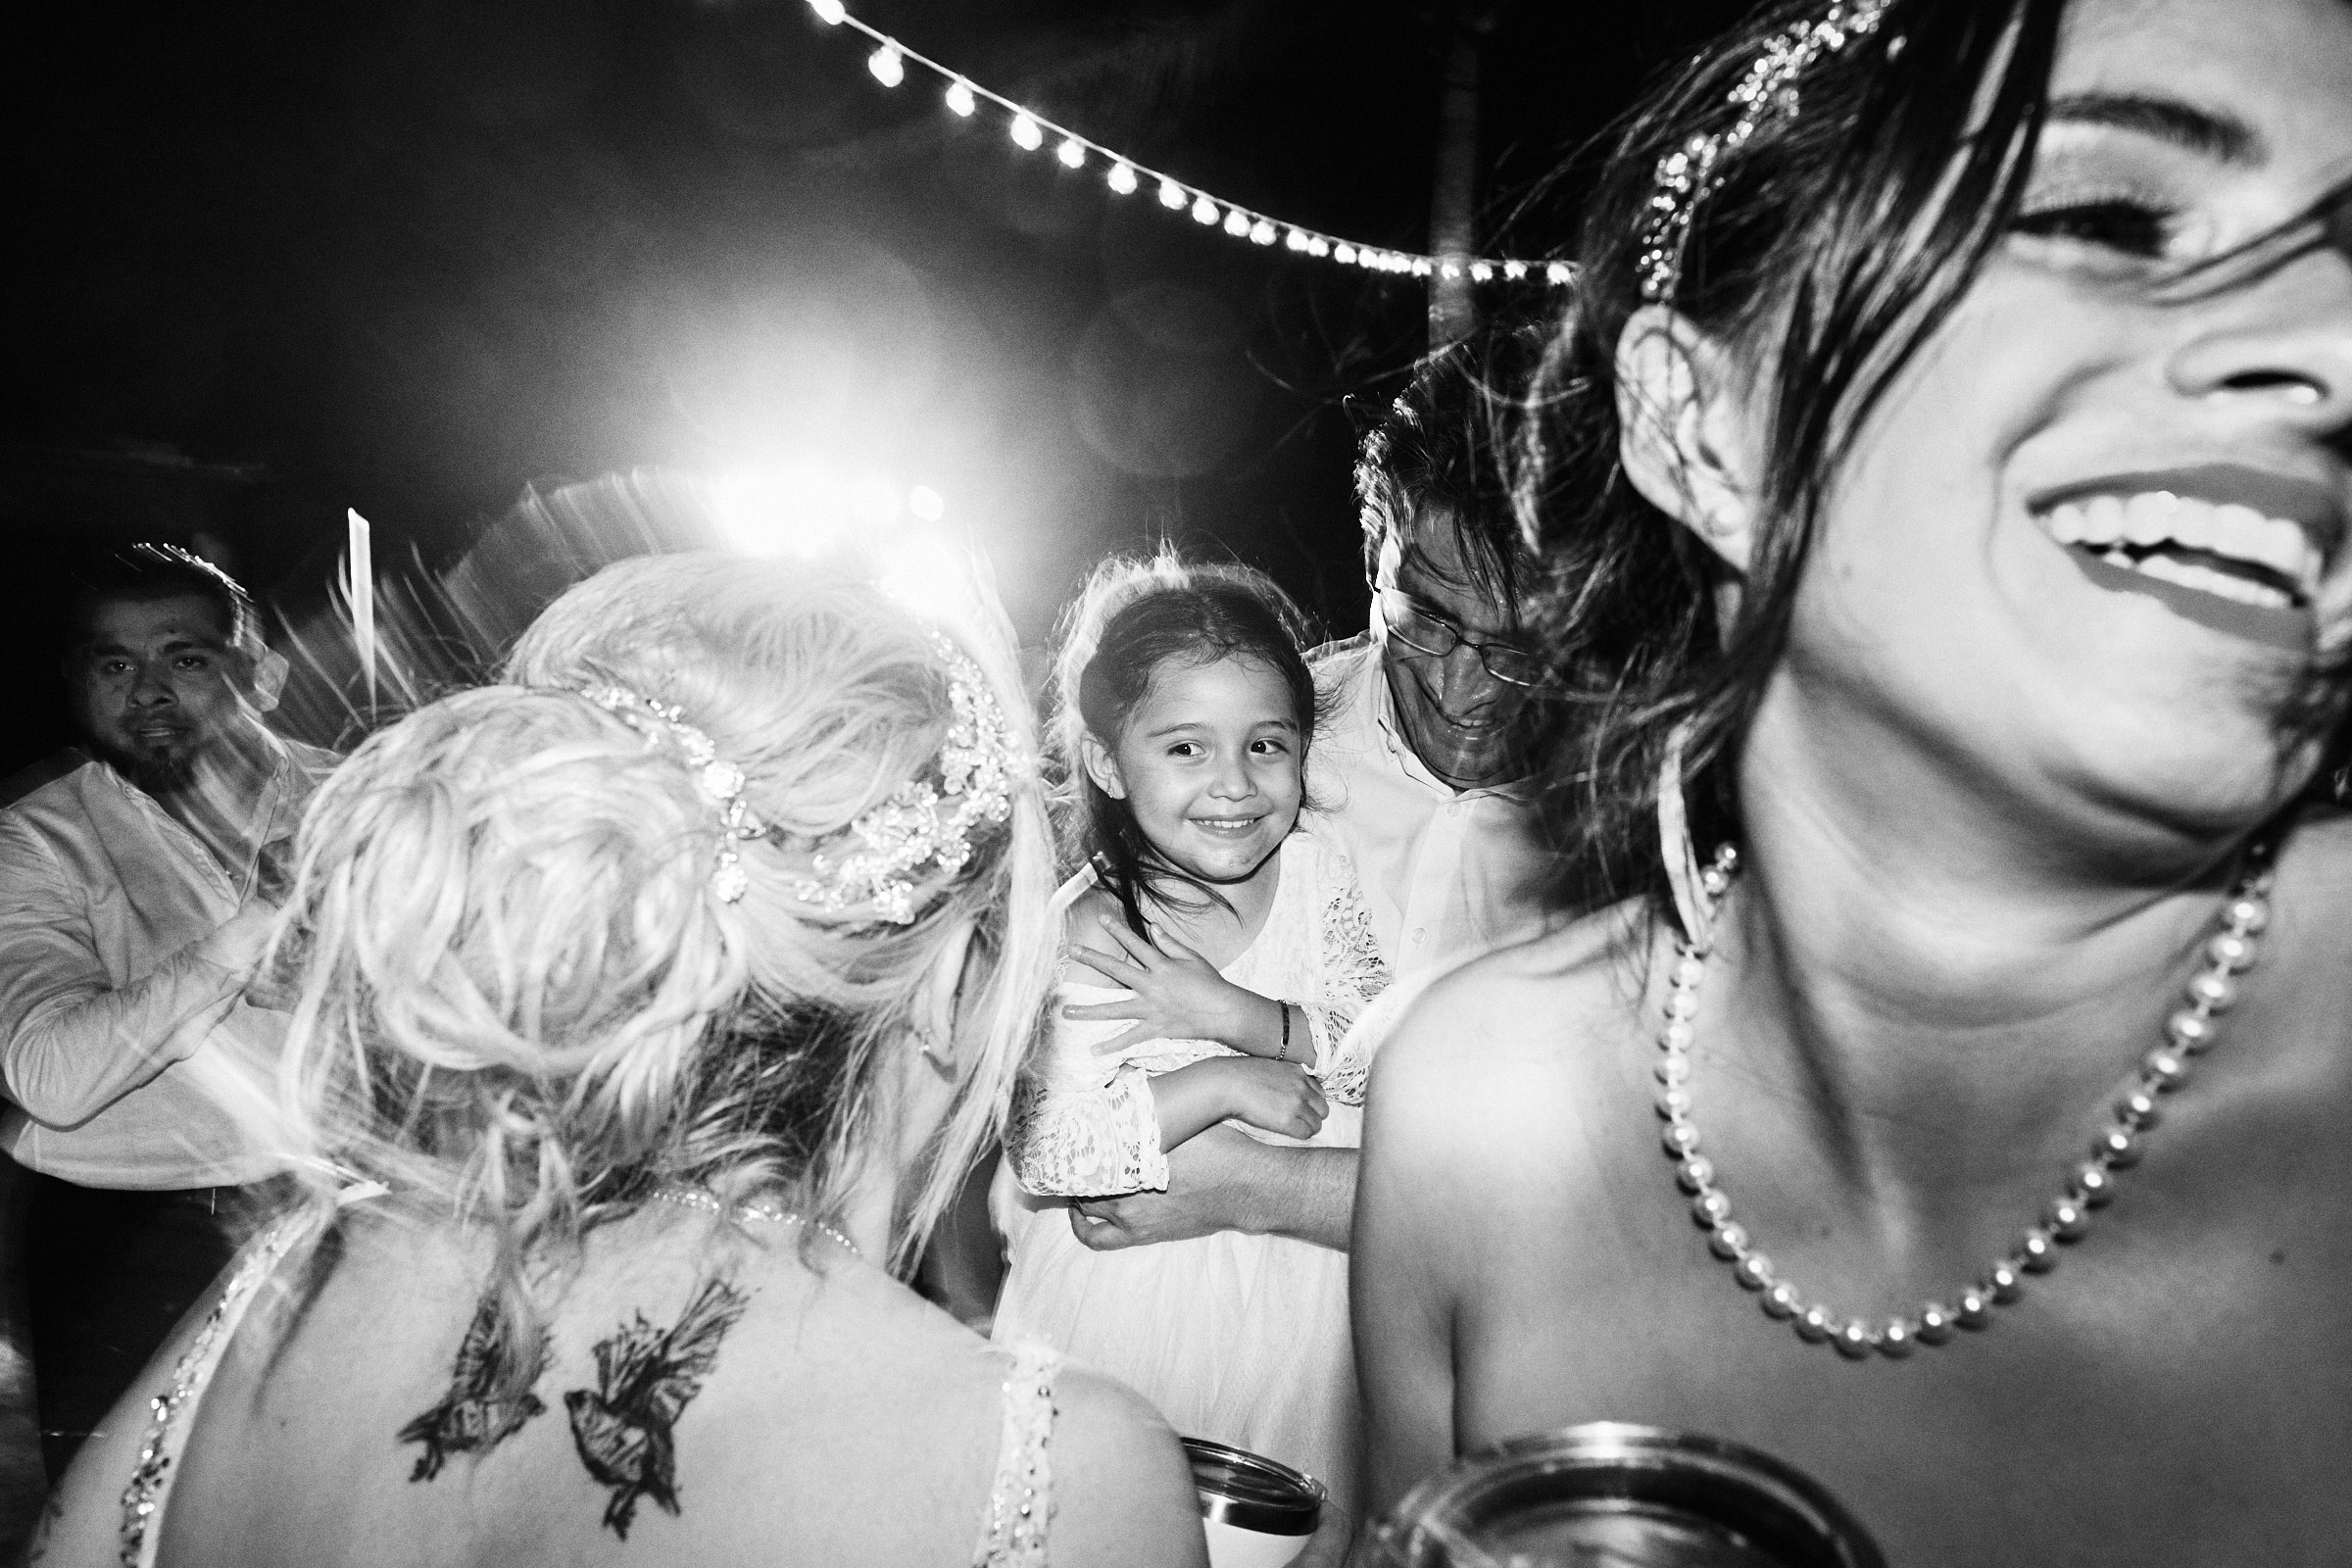 Energetic Photo Of Wedding Guests Dancing In Black And White